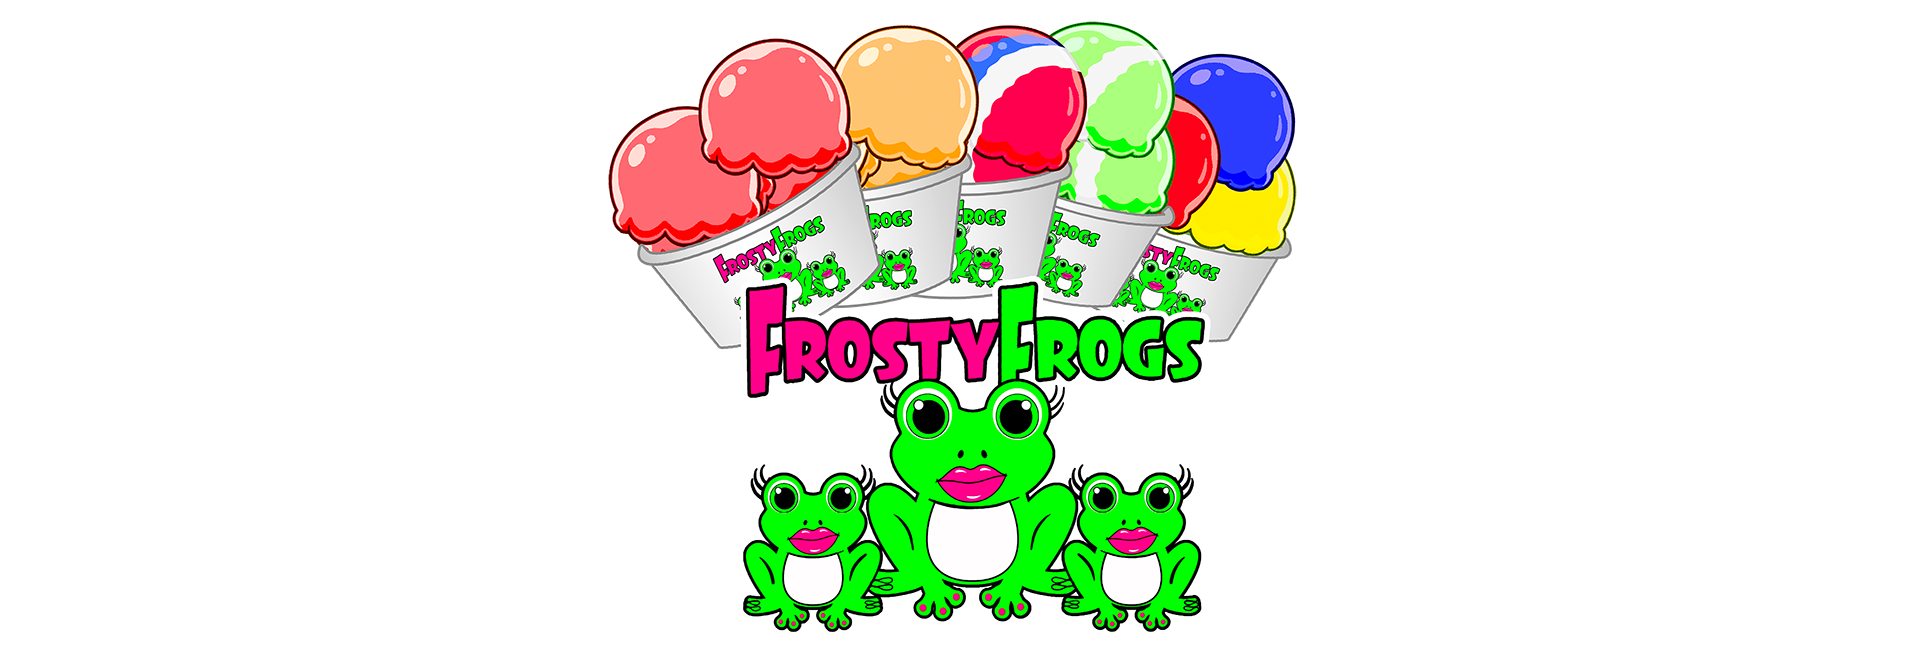 frosty-frogs-water-ice-header.png